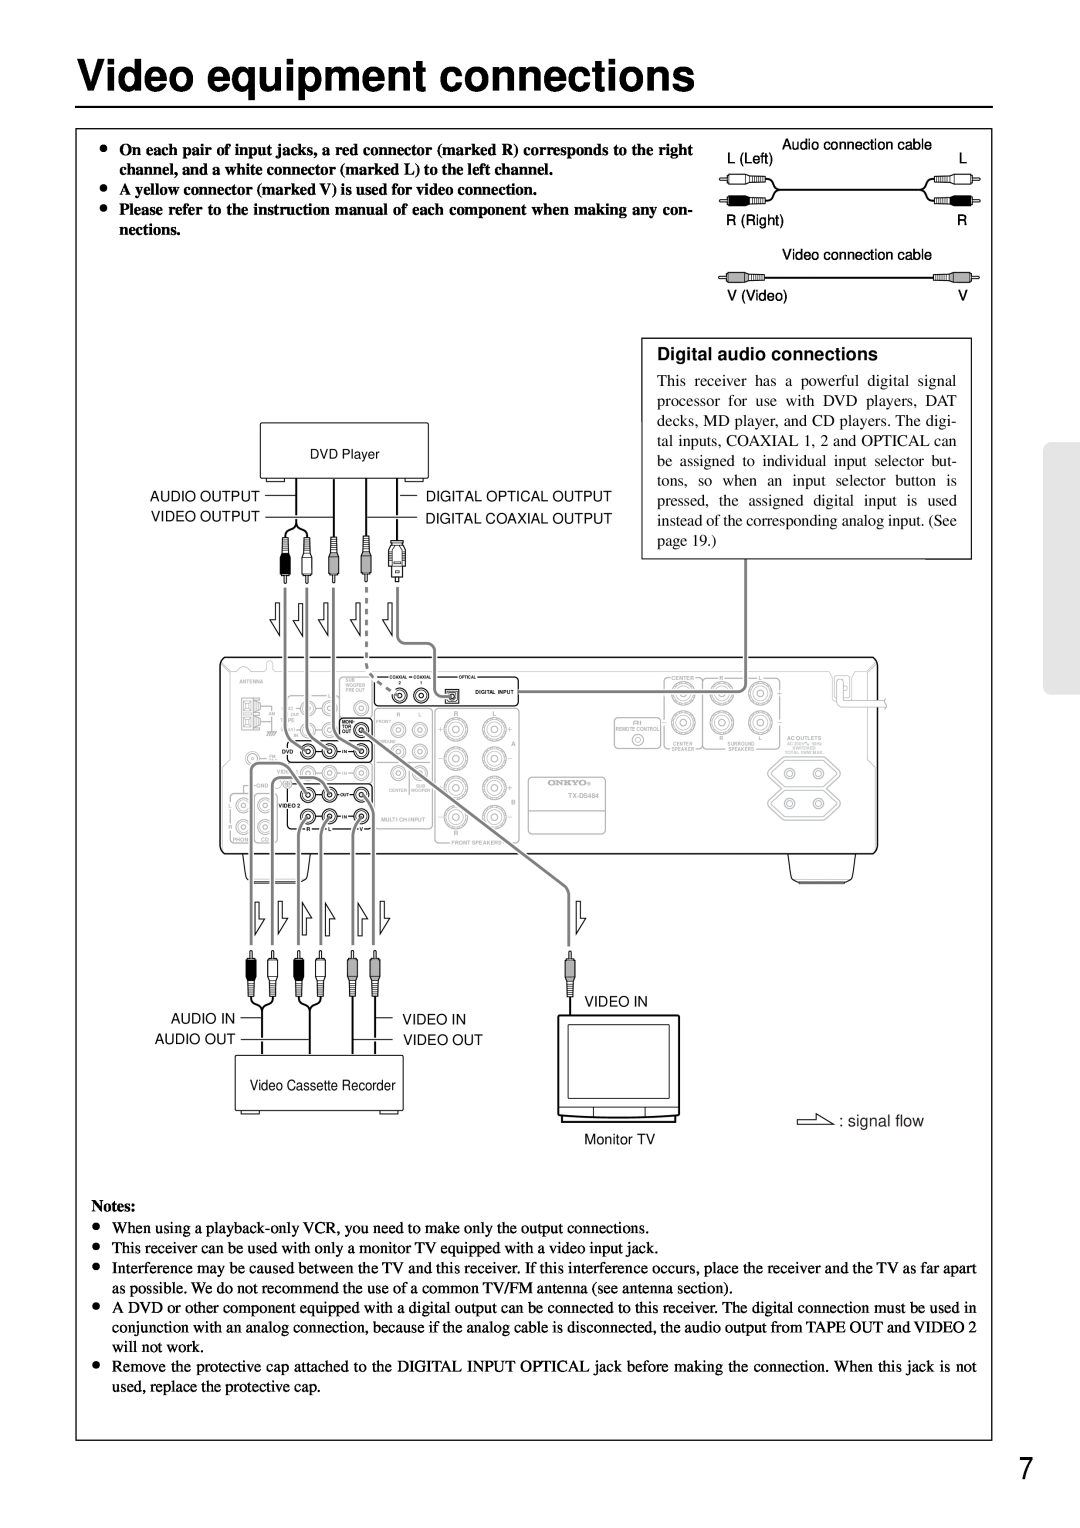 Onkyo TX-DS484 instruction manual Video equipment connections, Digital audio connections 